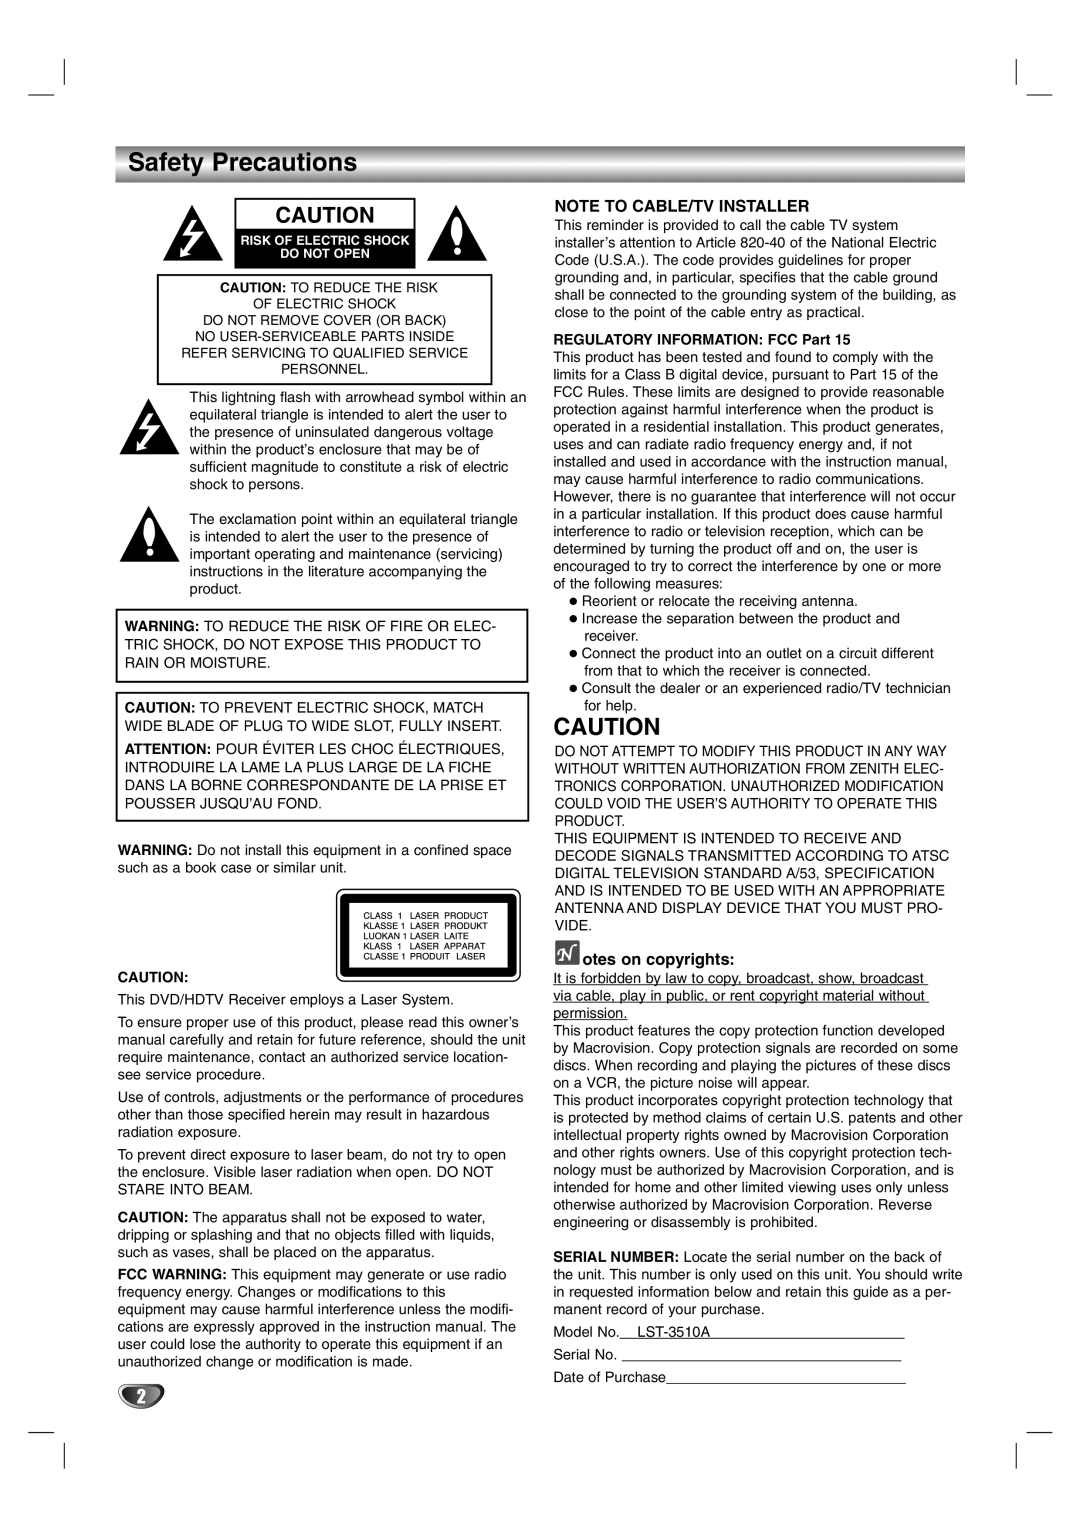 LG Electronics LST-3510A owner manual Safety Precautions, Note To Cable/Tv Installer, otes on copyrights 